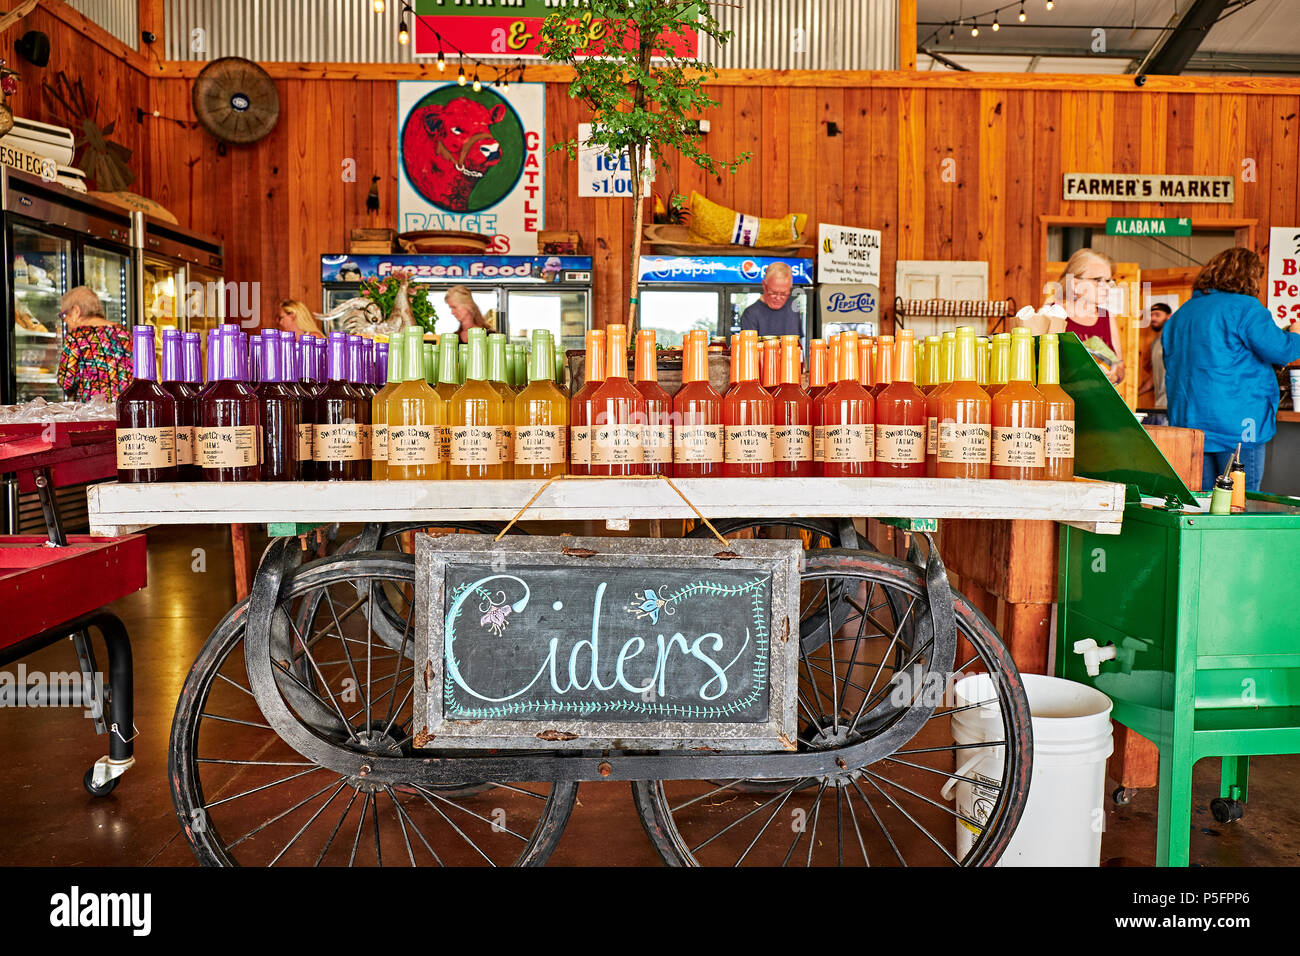 Rural country store display of old fashion apple cider, peach cider and muscadine cider in Pike Road Alabama, USA. Stock Photo